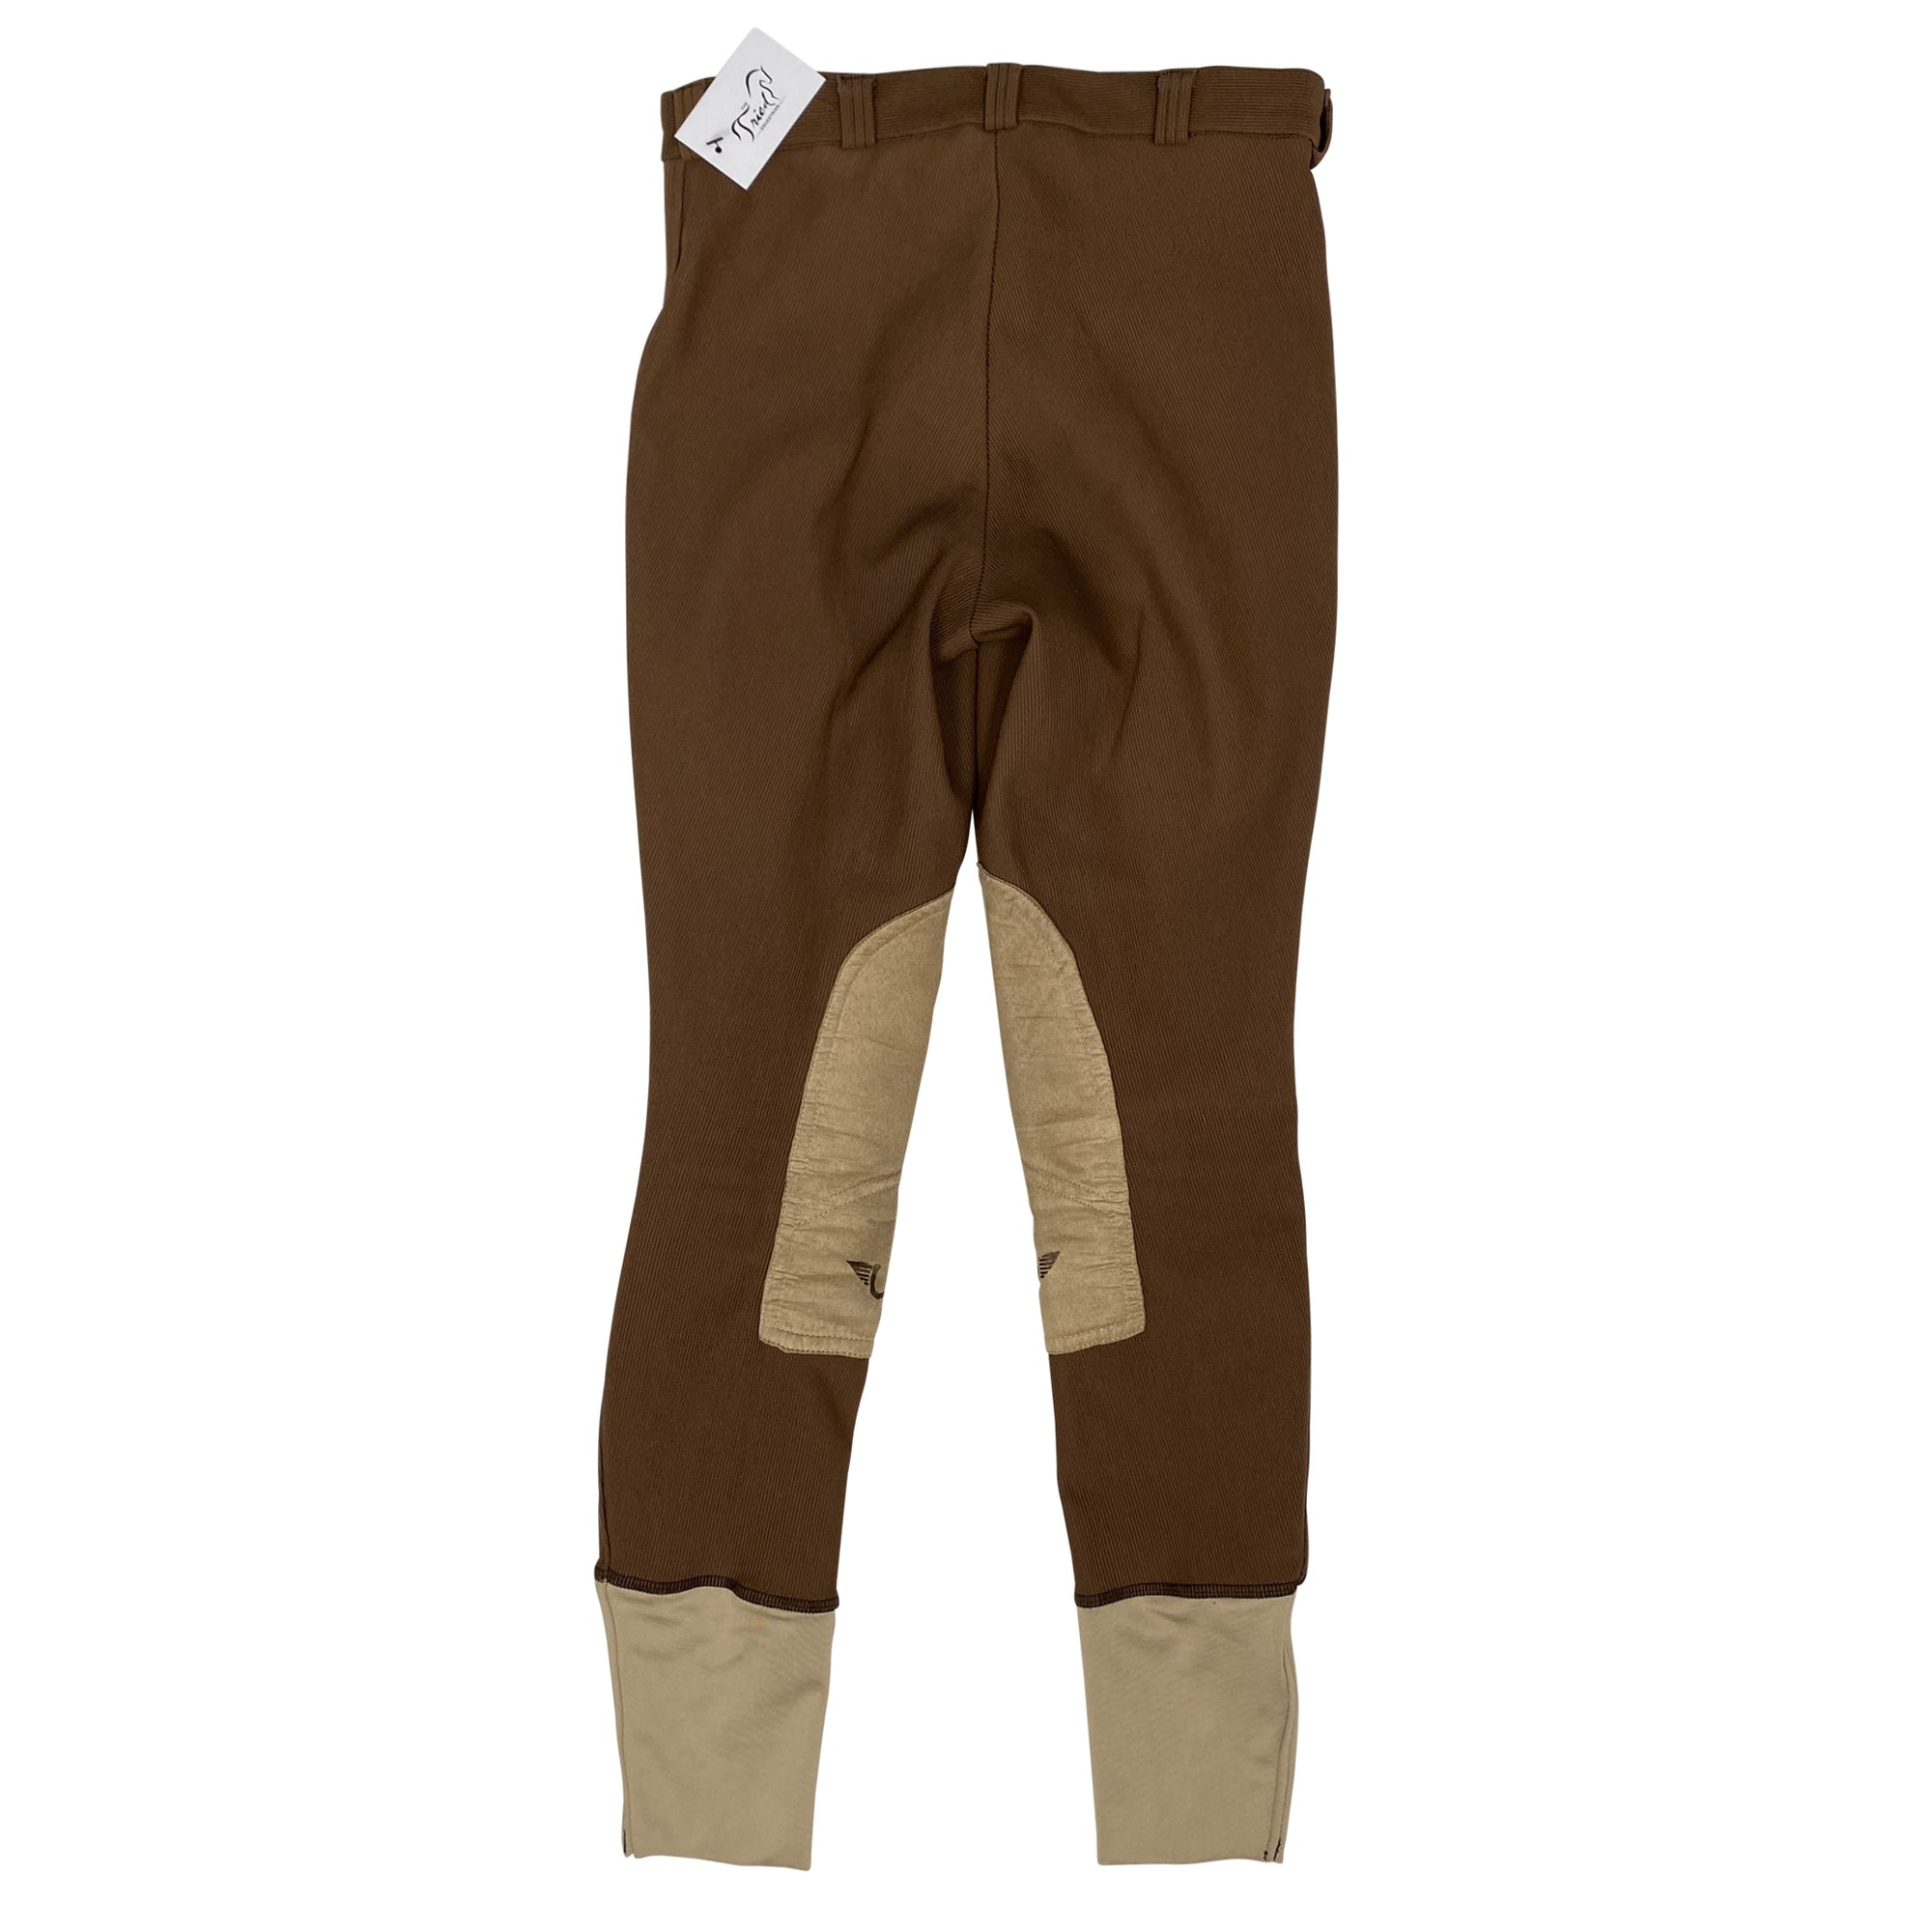 TuffRider Ribbed Breeches in Brown